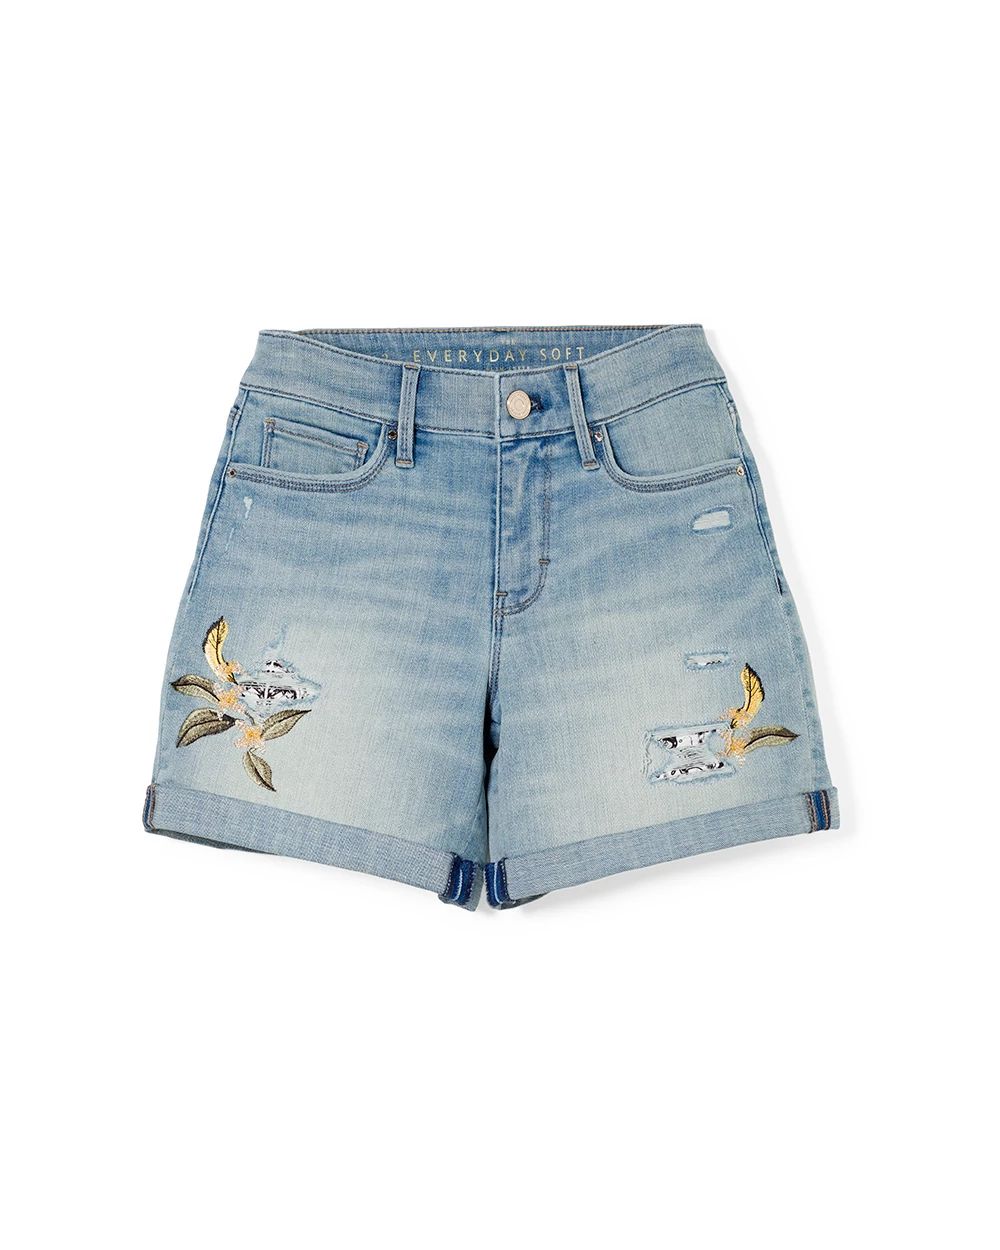 Mid-Rise Everyday Soft Denim™ Destructed Shorts click to view larger image.